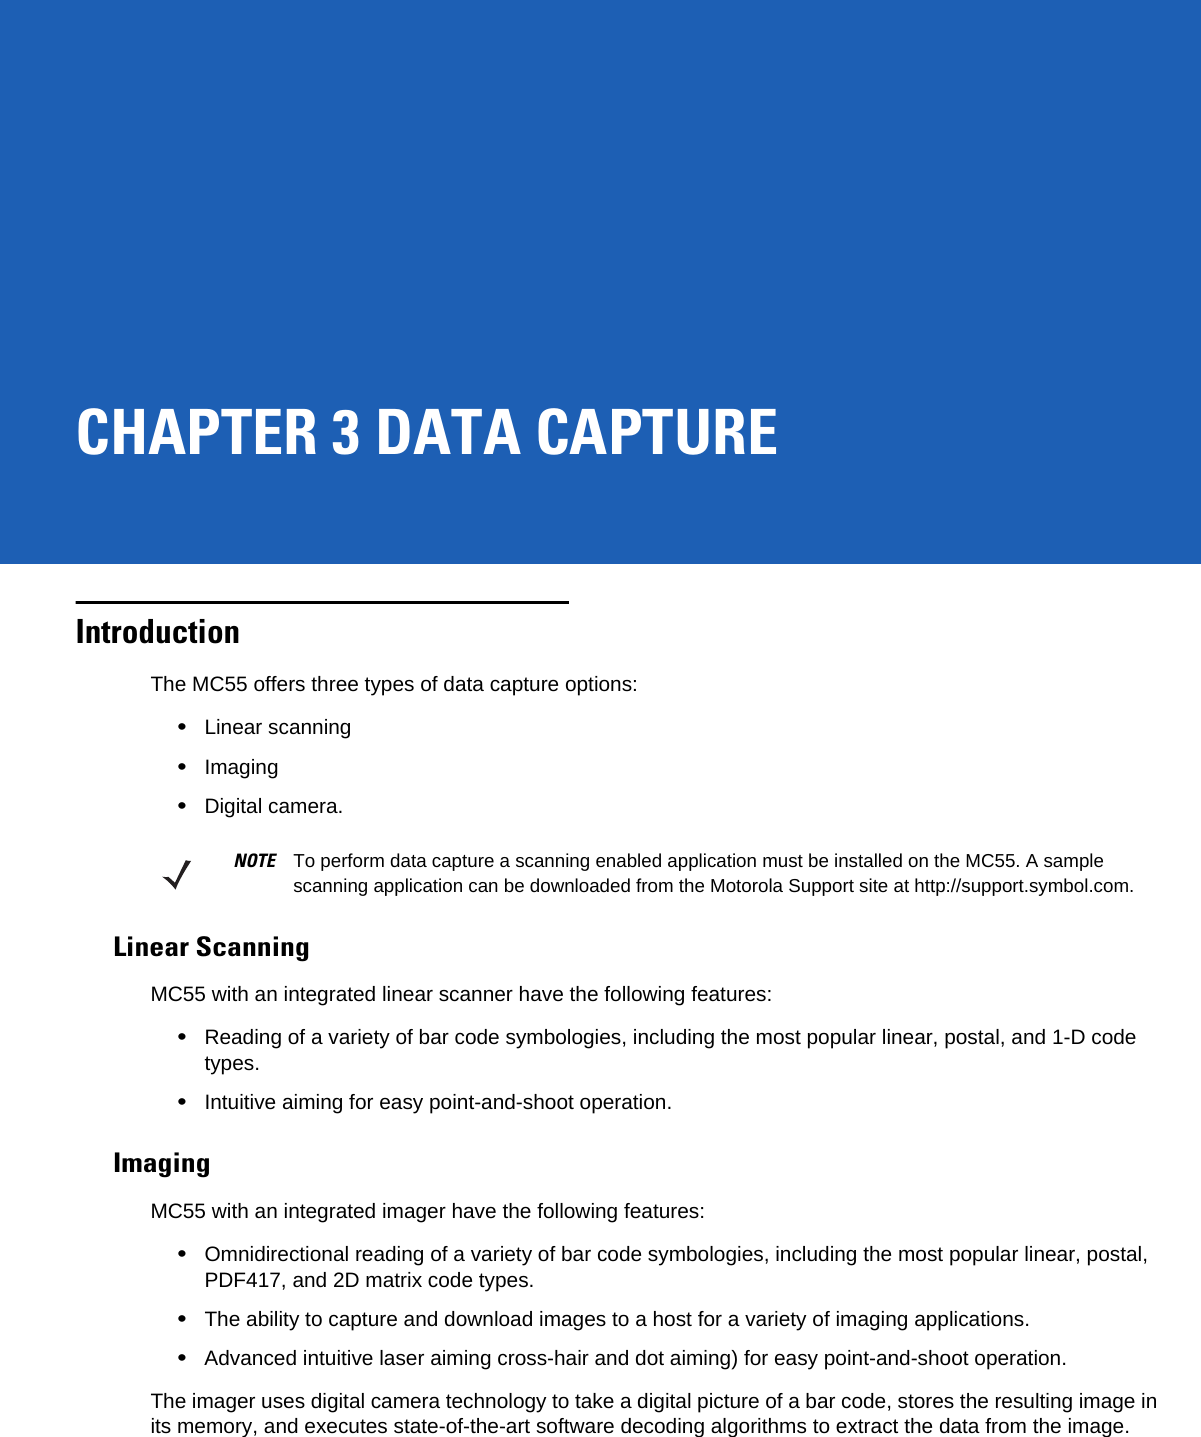 CHAPTER 3 DATA CAPTUREIntroductionThe MC55 offers three types of data capture options:•Linear scanning•Imaging•Digital camera.Linear ScanningMC55 with an integrated linear scanner have the following features:•Reading of a variety of bar code symbologies, including the most popular linear, postal, and 1-D code types. •Intuitive aiming for easy point-and-shoot operation.ImagingMC55 with an integrated imager have the following features:•Omnidirectional reading of a variety of bar code symbologies, including the most popular linear, postal, PDF417, and 2D matrix code types.•The ability to capture and download images to a host for a variety of imaging applications.•Advanced intuitive laser aiming cross-hair and dot aiming) for easy point-and-shoot operation.The imager uses digital camera technology to take a digital picture of a bar code, stores the resulting image in its memory, and executes state-of-the-art software decoding algorithms to extract the data from the image.NOTE To perform data capture a scanning enabled application must be installed on the MC55. A sample scanning application can be downloaded from the Motorola Support site at http://support.symbol.com.